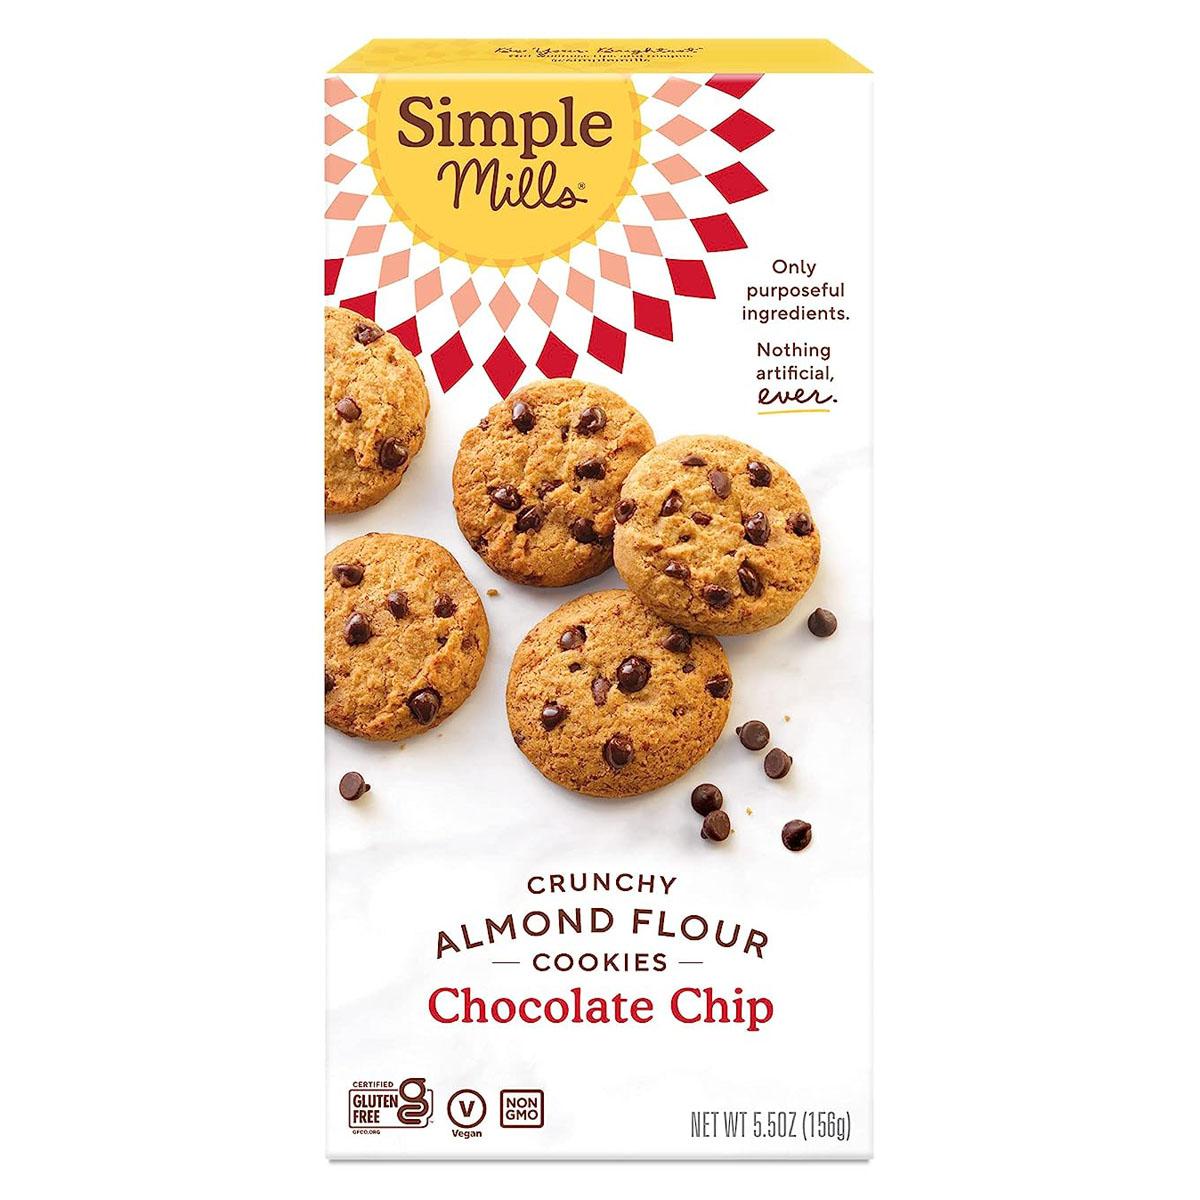 Simple Mills Almond Flour Crunchy Cookies for $2.40